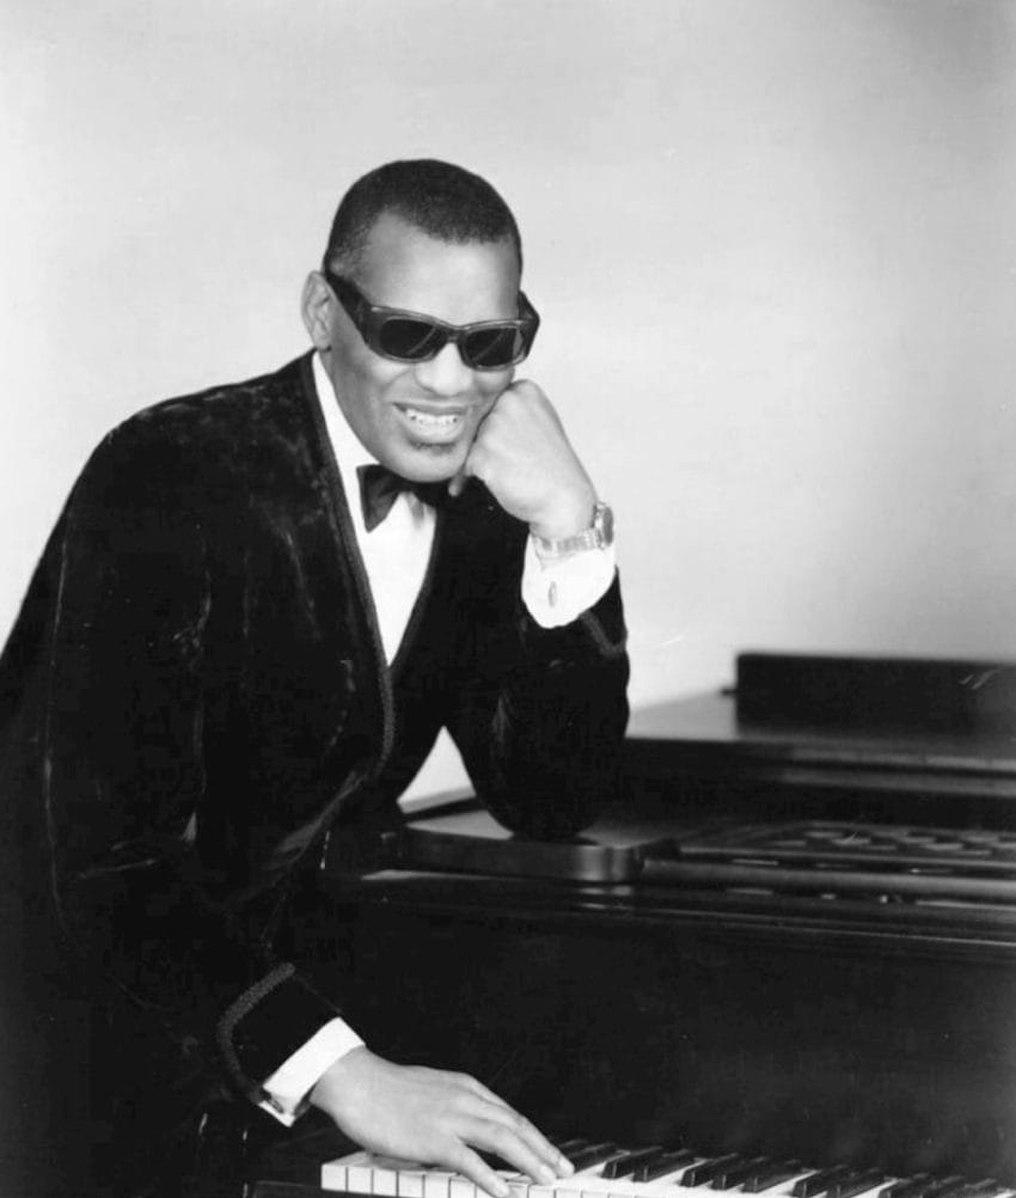 Ray Charles - Let's Fall in Love